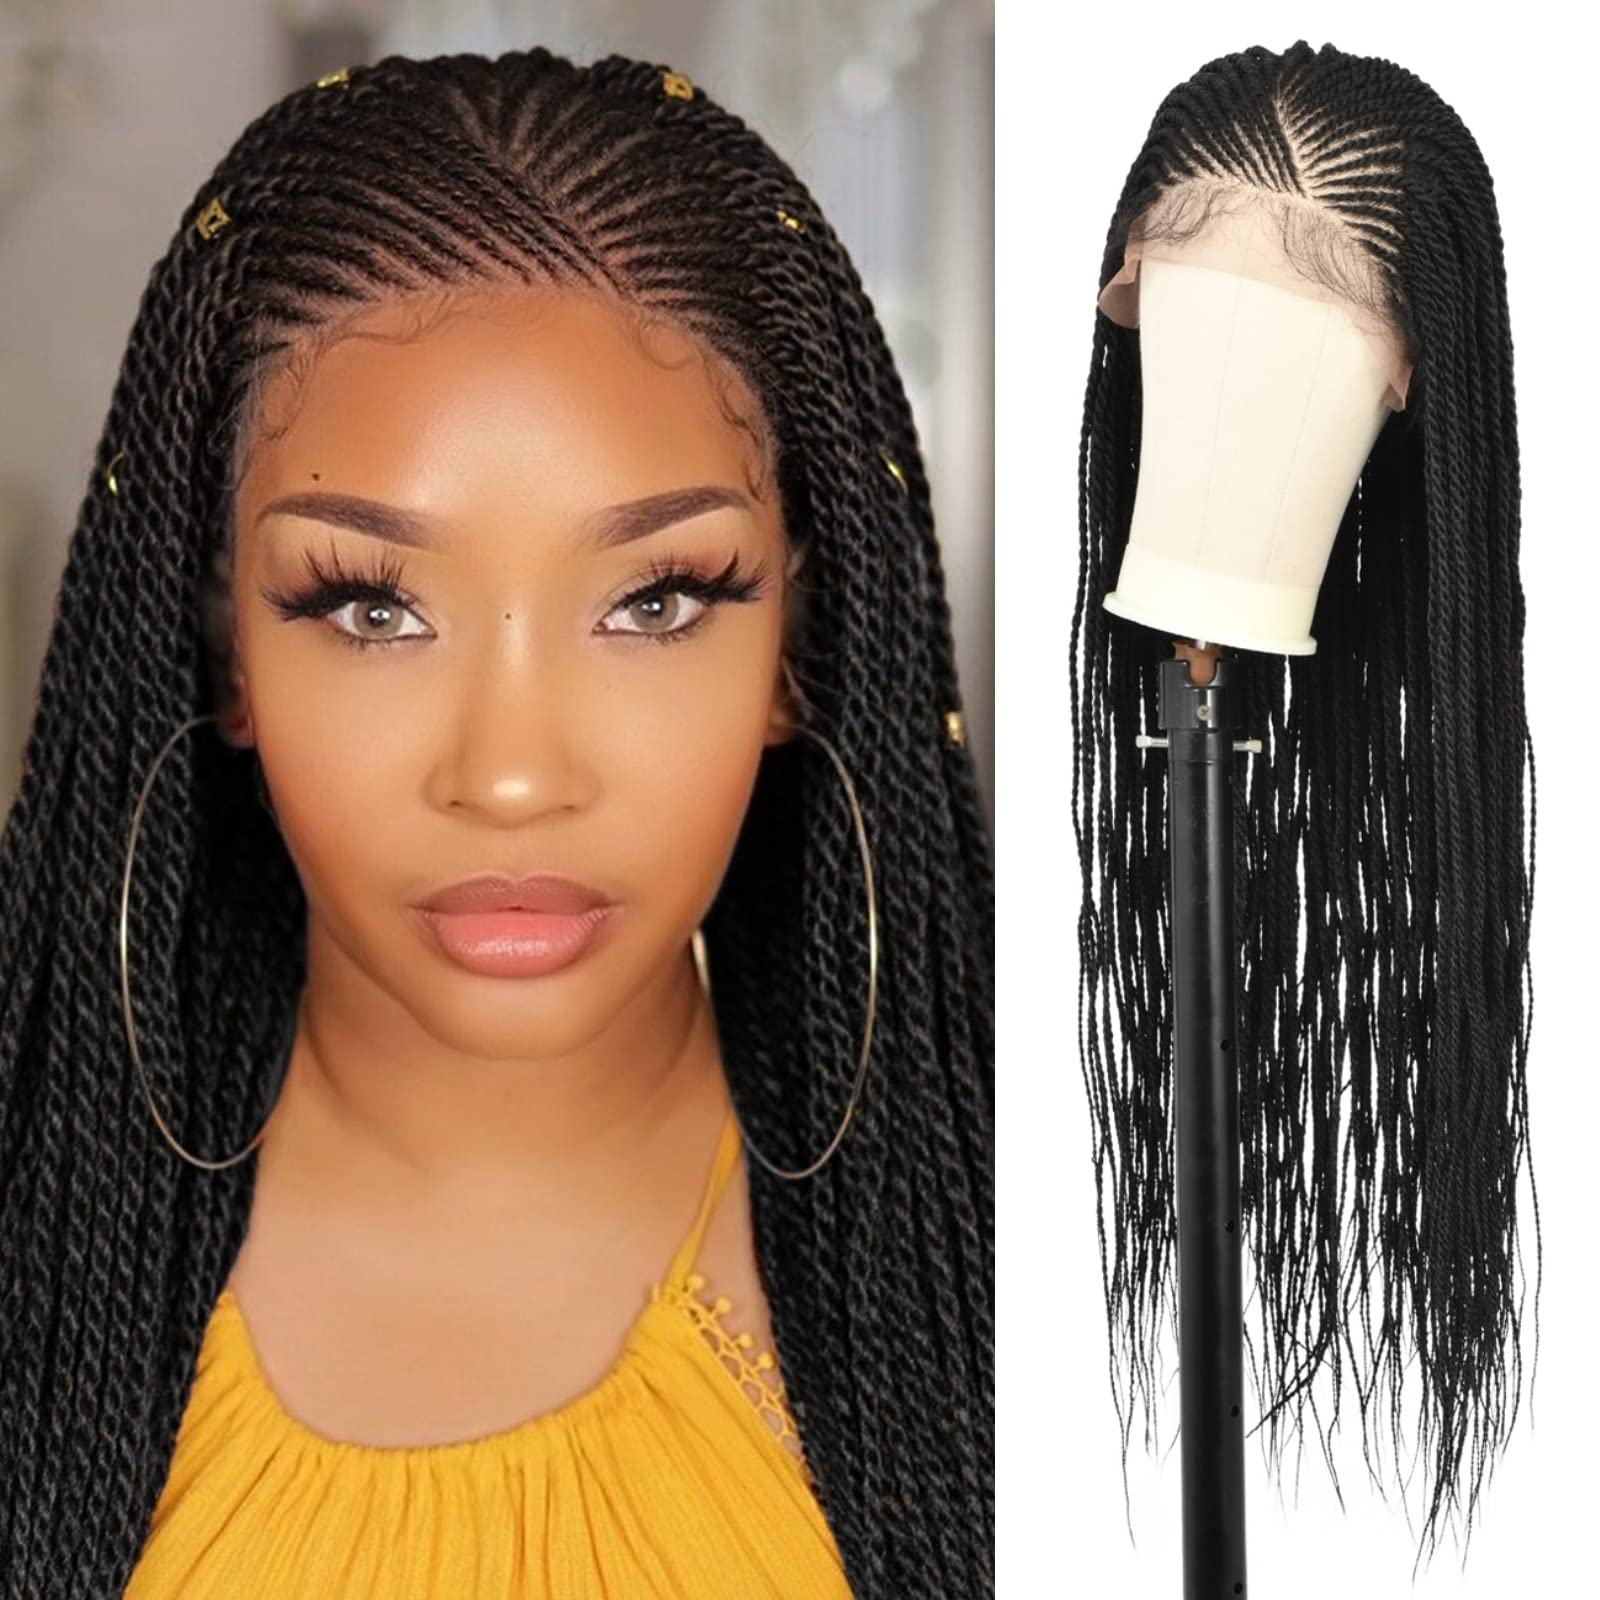 Brinbea 13X6 Lace Front Braided Wigs for Women Premium Synthetic Twisted Braid  Wig Black Cornrow Braided Hair Wigs with Baby Hair 30 inches Twist Braids